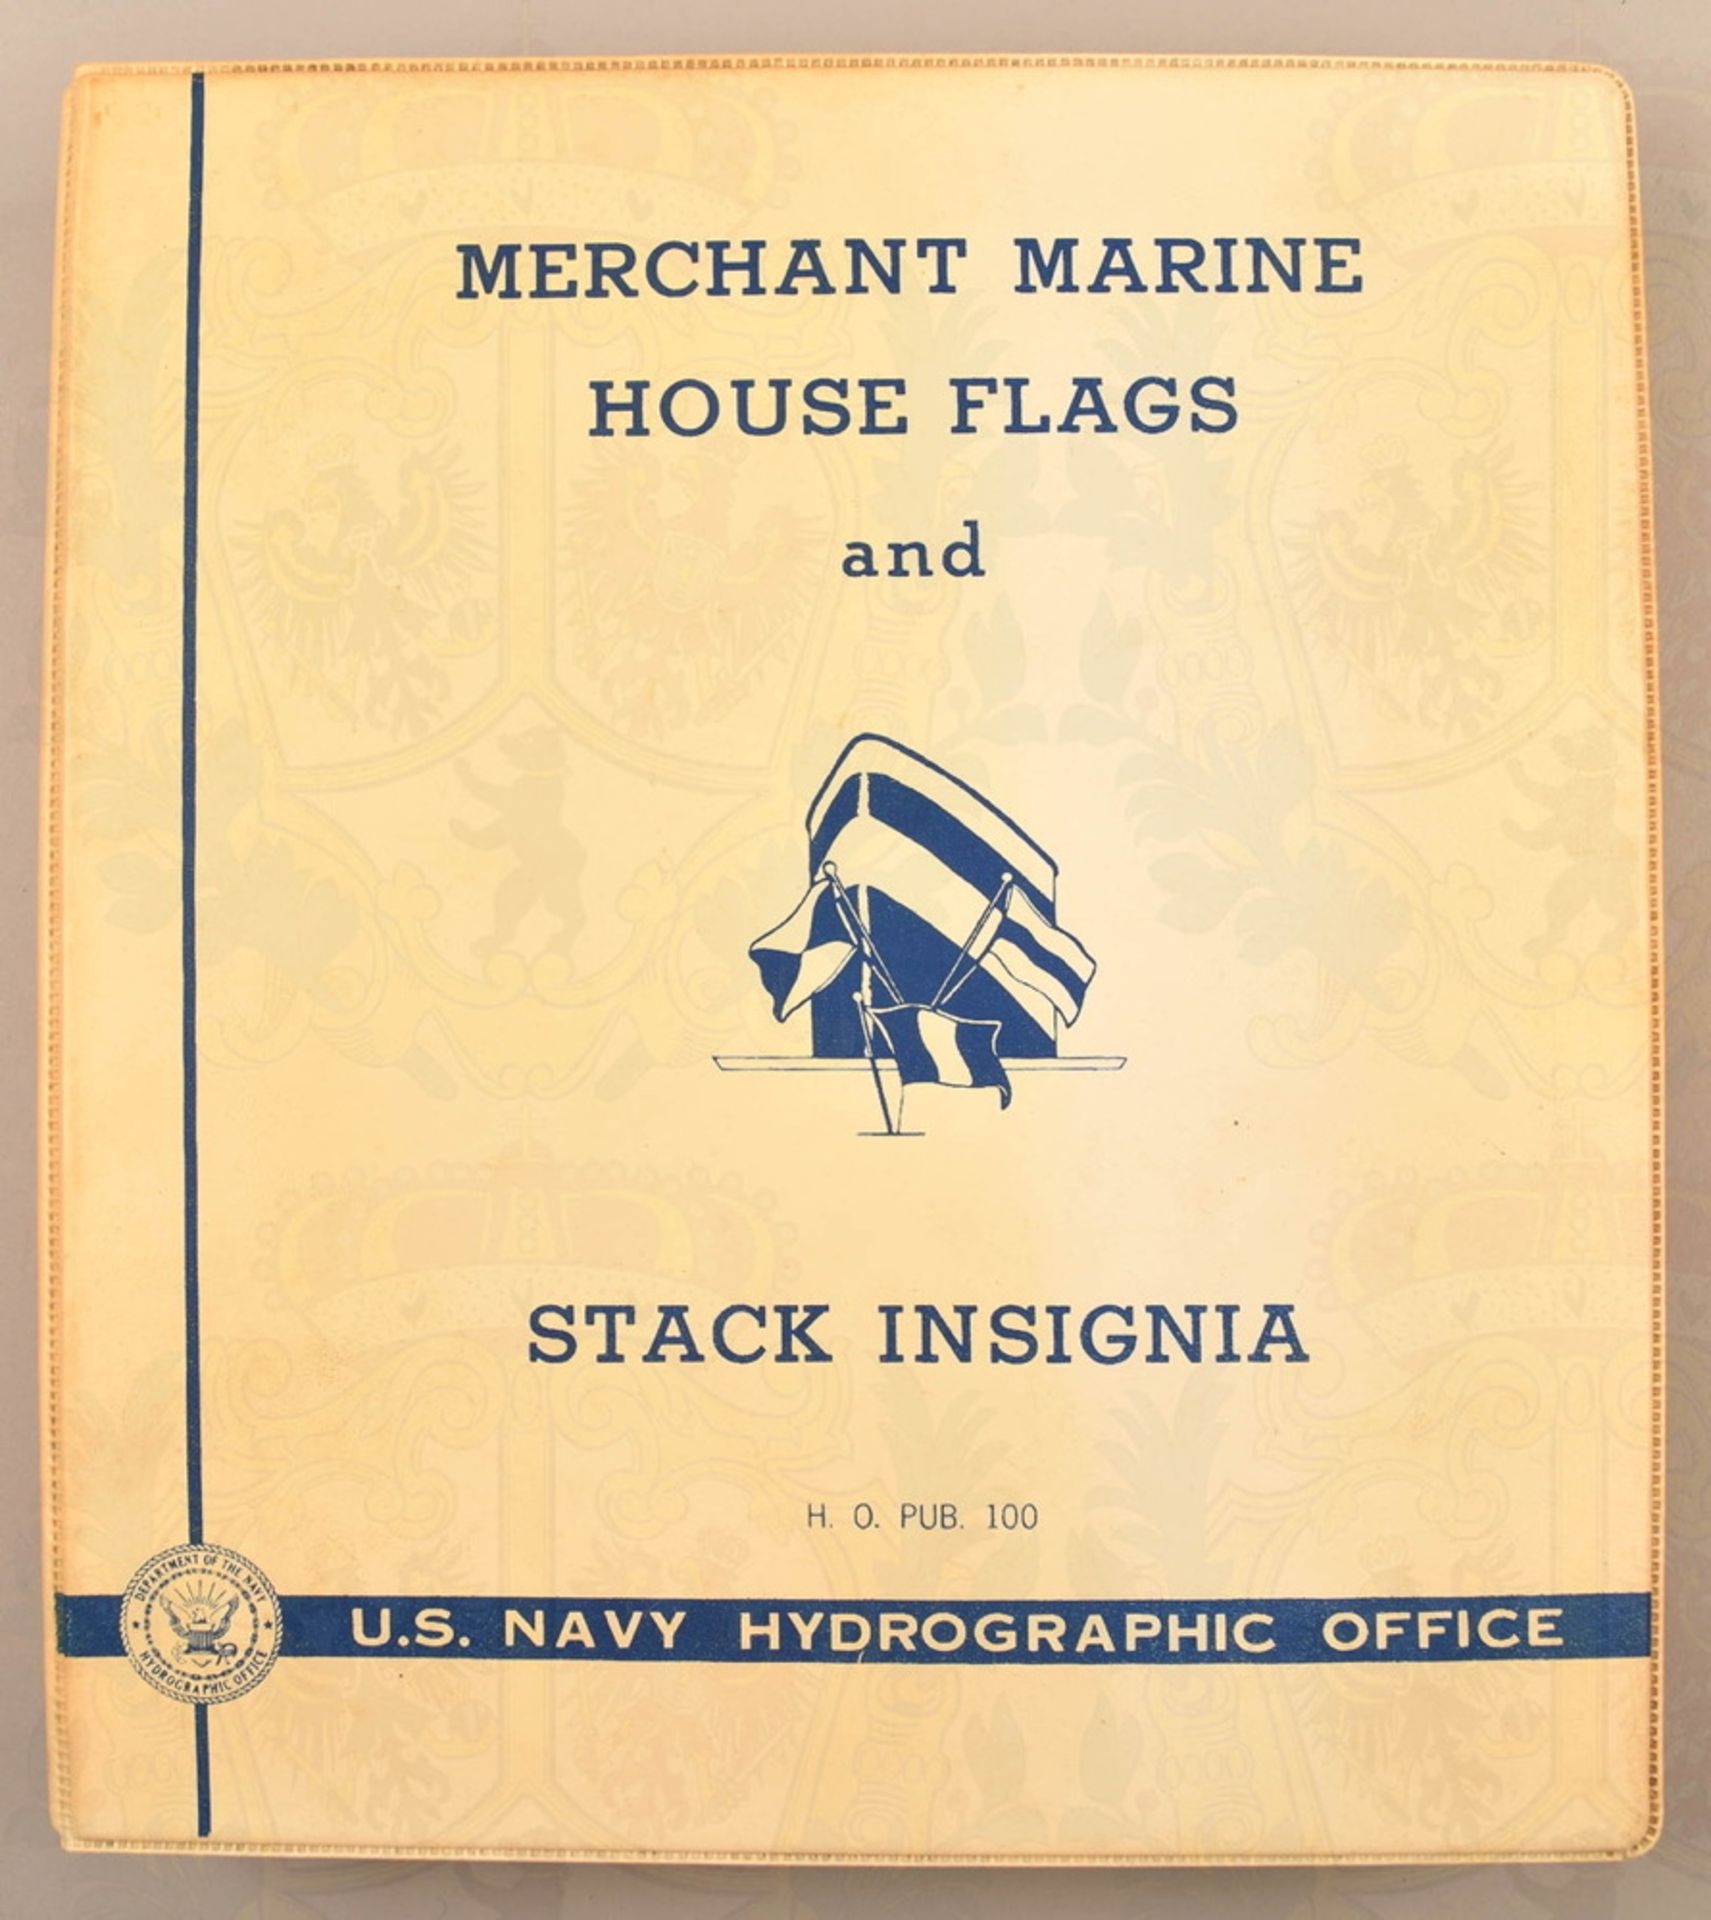 Merchant Marine House Flags and Stack Insignia